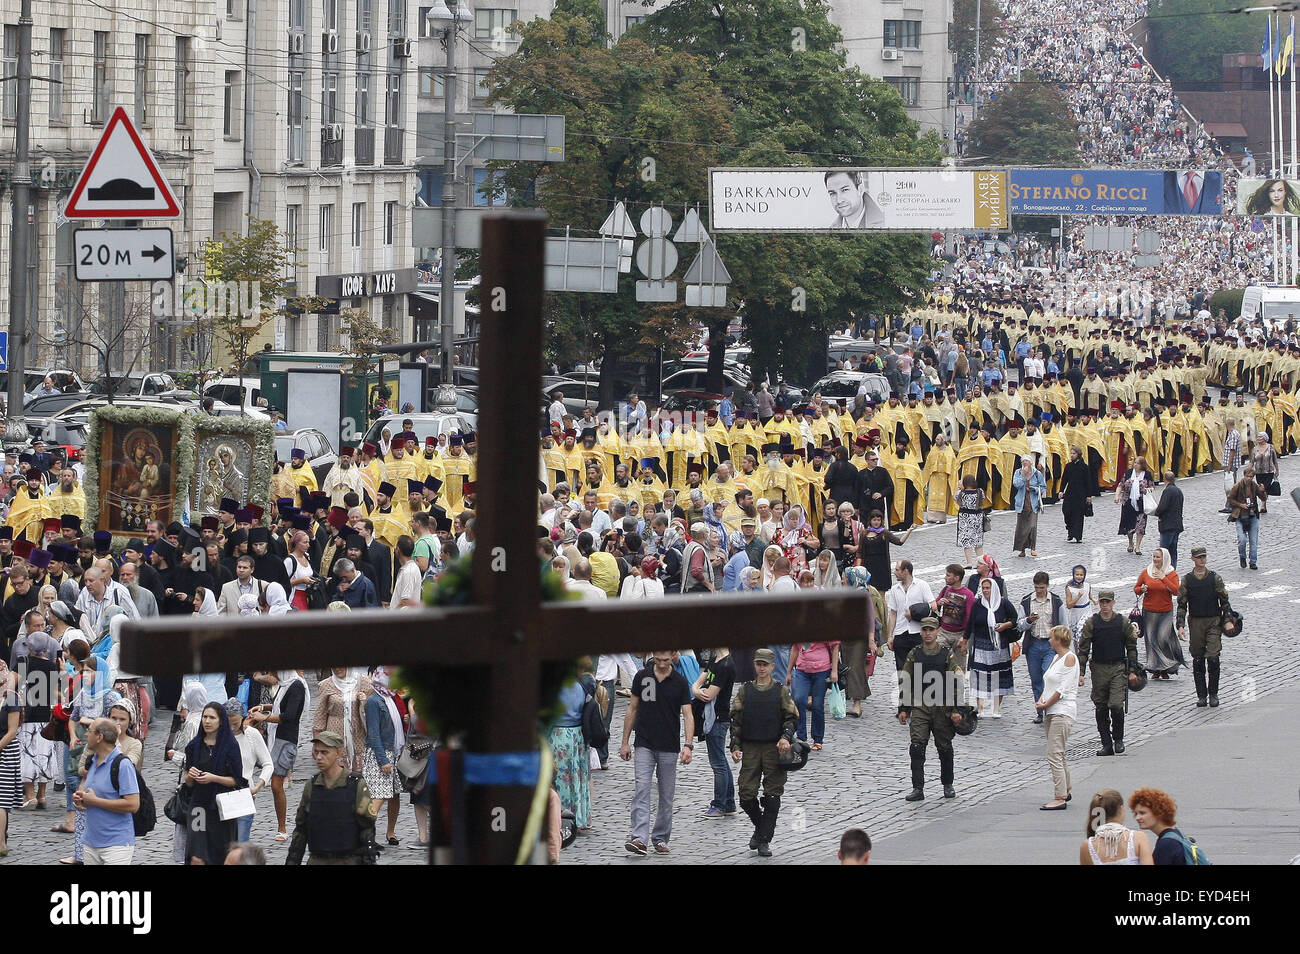 Kiev, Ukraine. 27th July, 2015. Believers and priests from the Ukrainian Orthodox Church of Moscow Patriarchate take a part in religious procession marking the 1000th anniversary of the Repose of Vladimir the Great at St. Vladimirs Hill in Kiev, Ukraine, 27 July 2015. The Grand Prince of Kiev, Vladimir the Great, also known as St. Vladimir, Vladimir the Baptizer of Rus and Vladimir the Red Sun, was the first Christian ruler in the Kievan Rus who christianized the region. Orthodox believers will mark the 1027th anniversary of Kievan Rus Christianization on 28 July. (Credit Image: © Serg Glovny Stock Photo